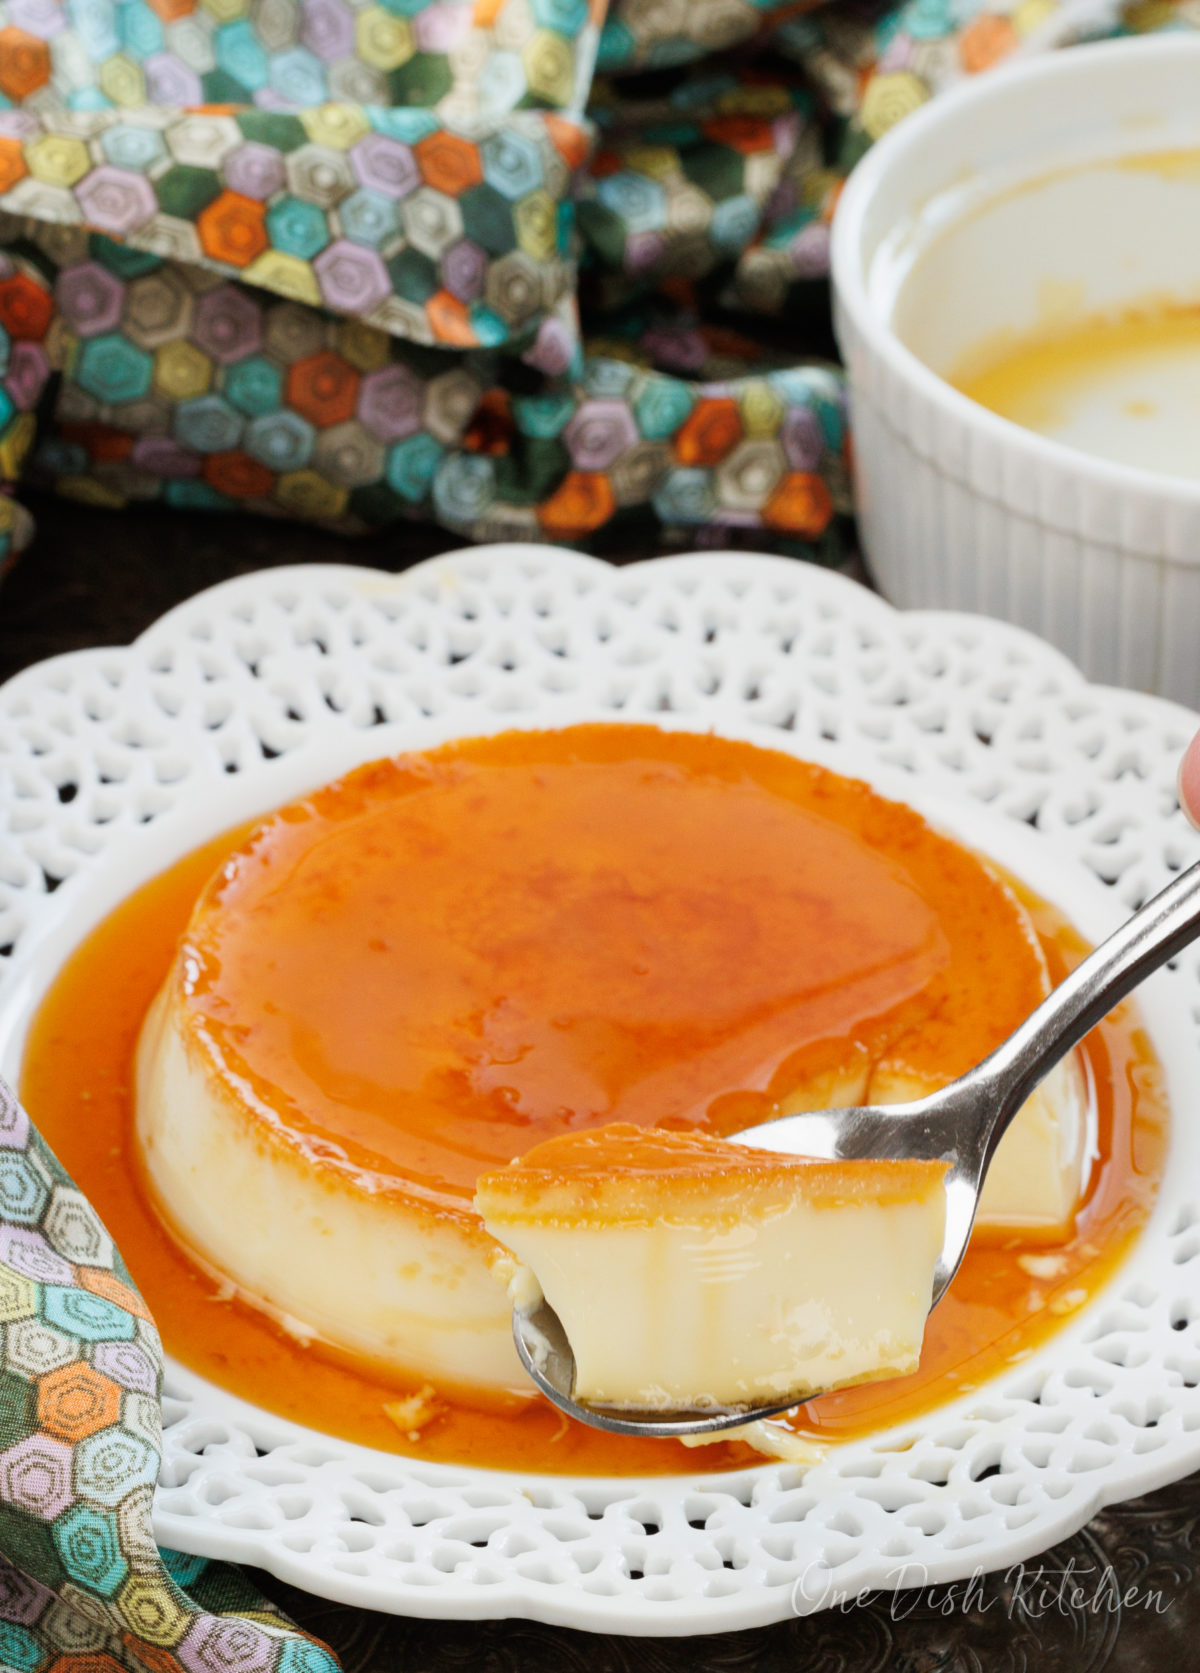 a single flan on a plate with a spoon on the side.